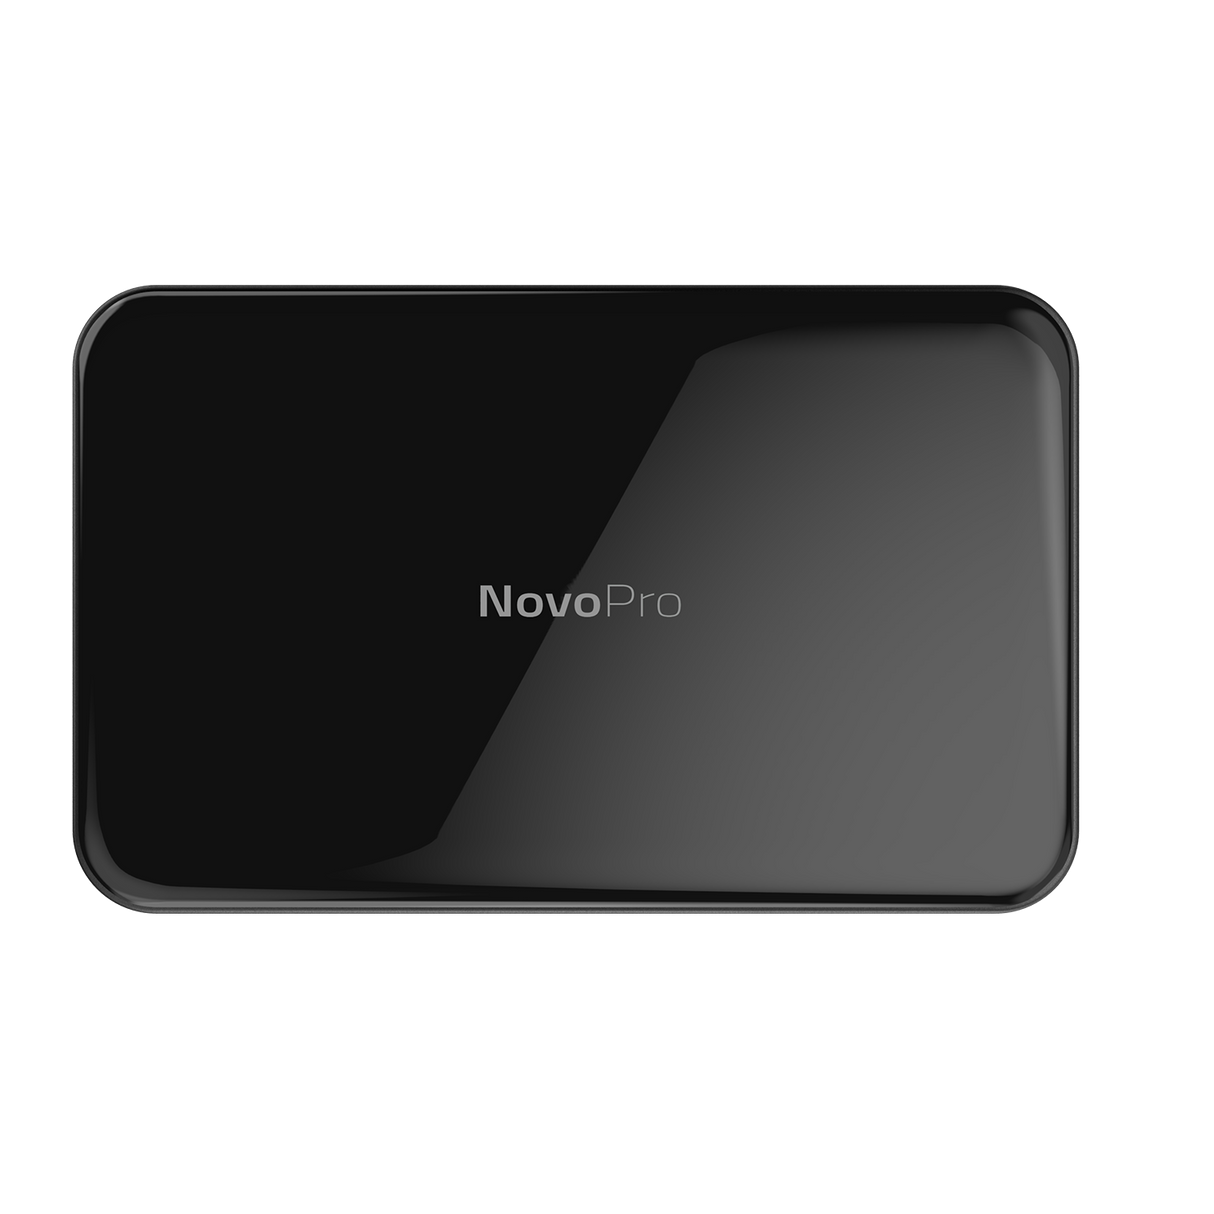 NovoPro Up to 64 Users Education and Corporate Edition